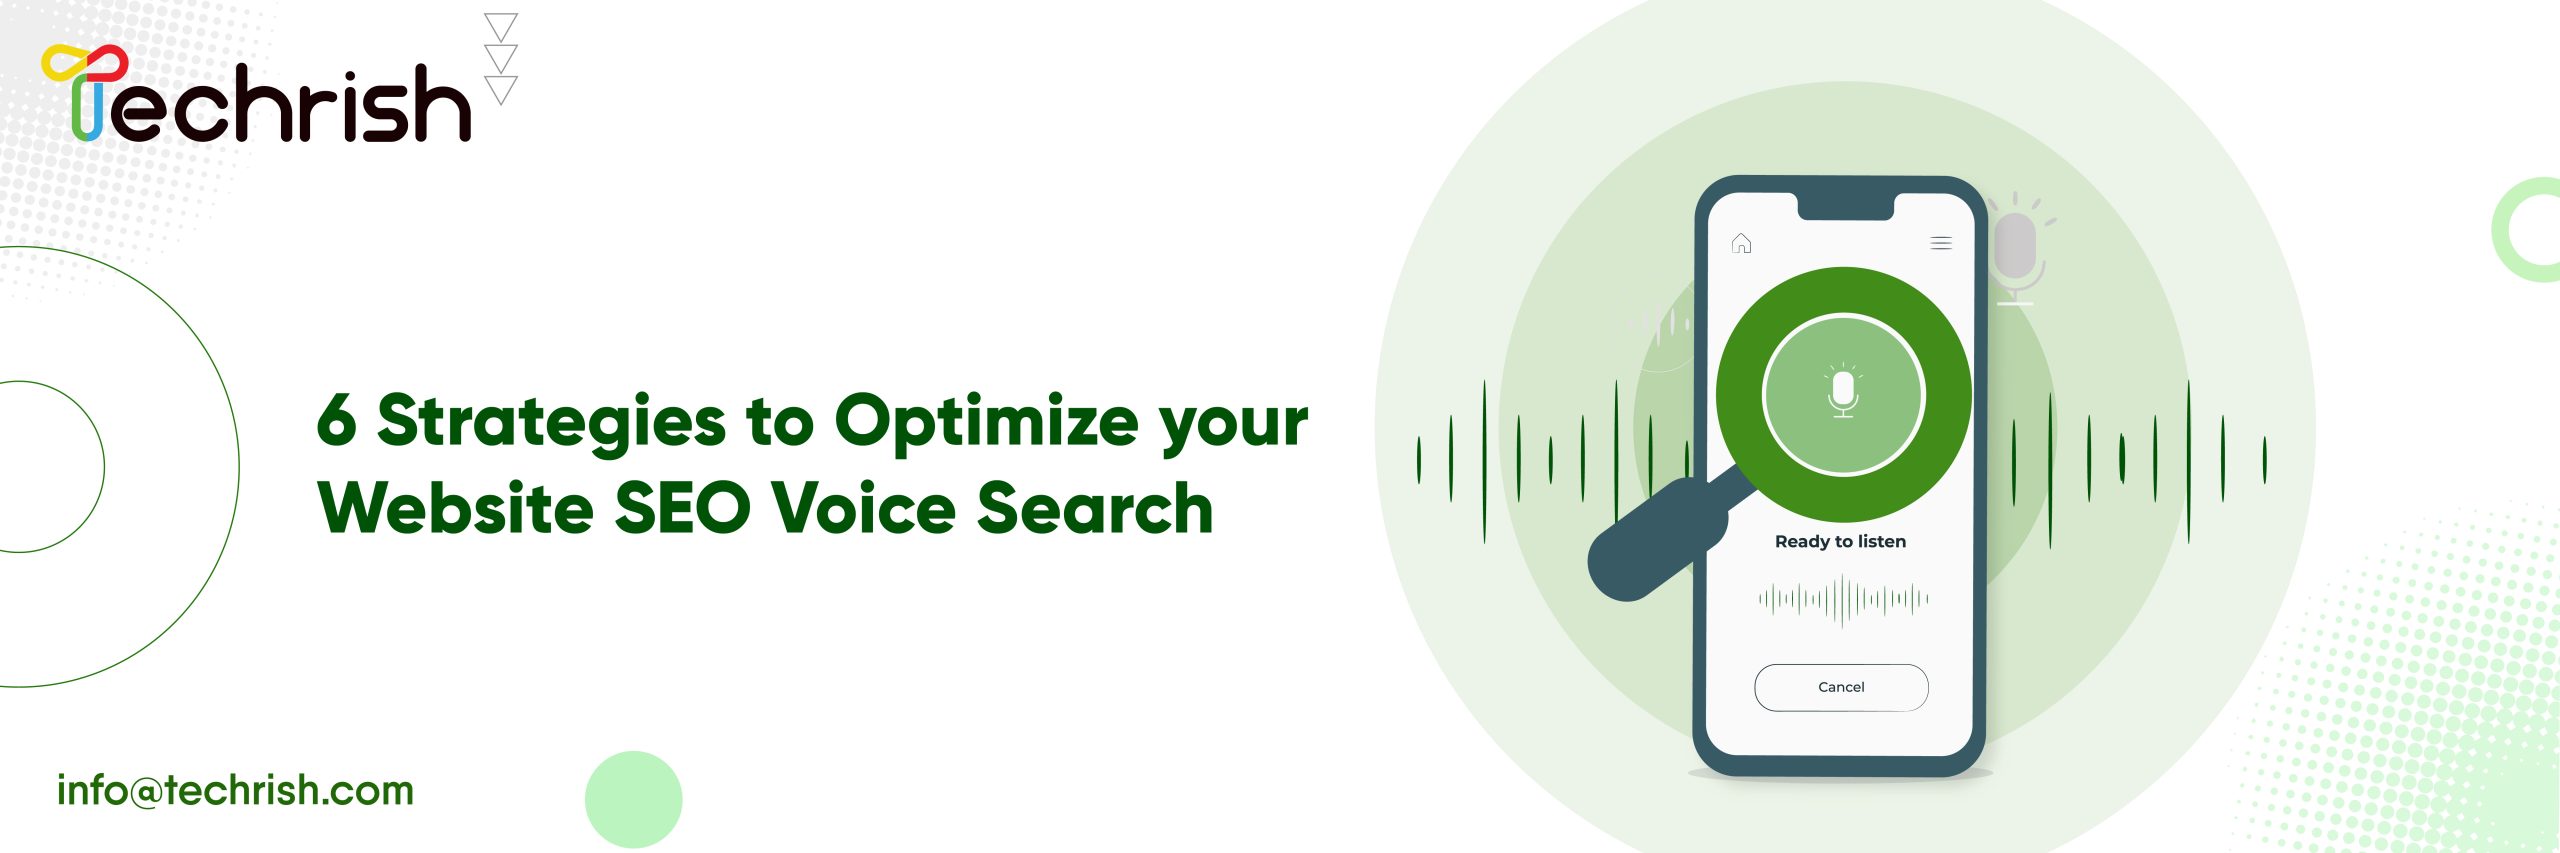 Top 6 Strategies to Optimize your Website SEO for Voice Searches